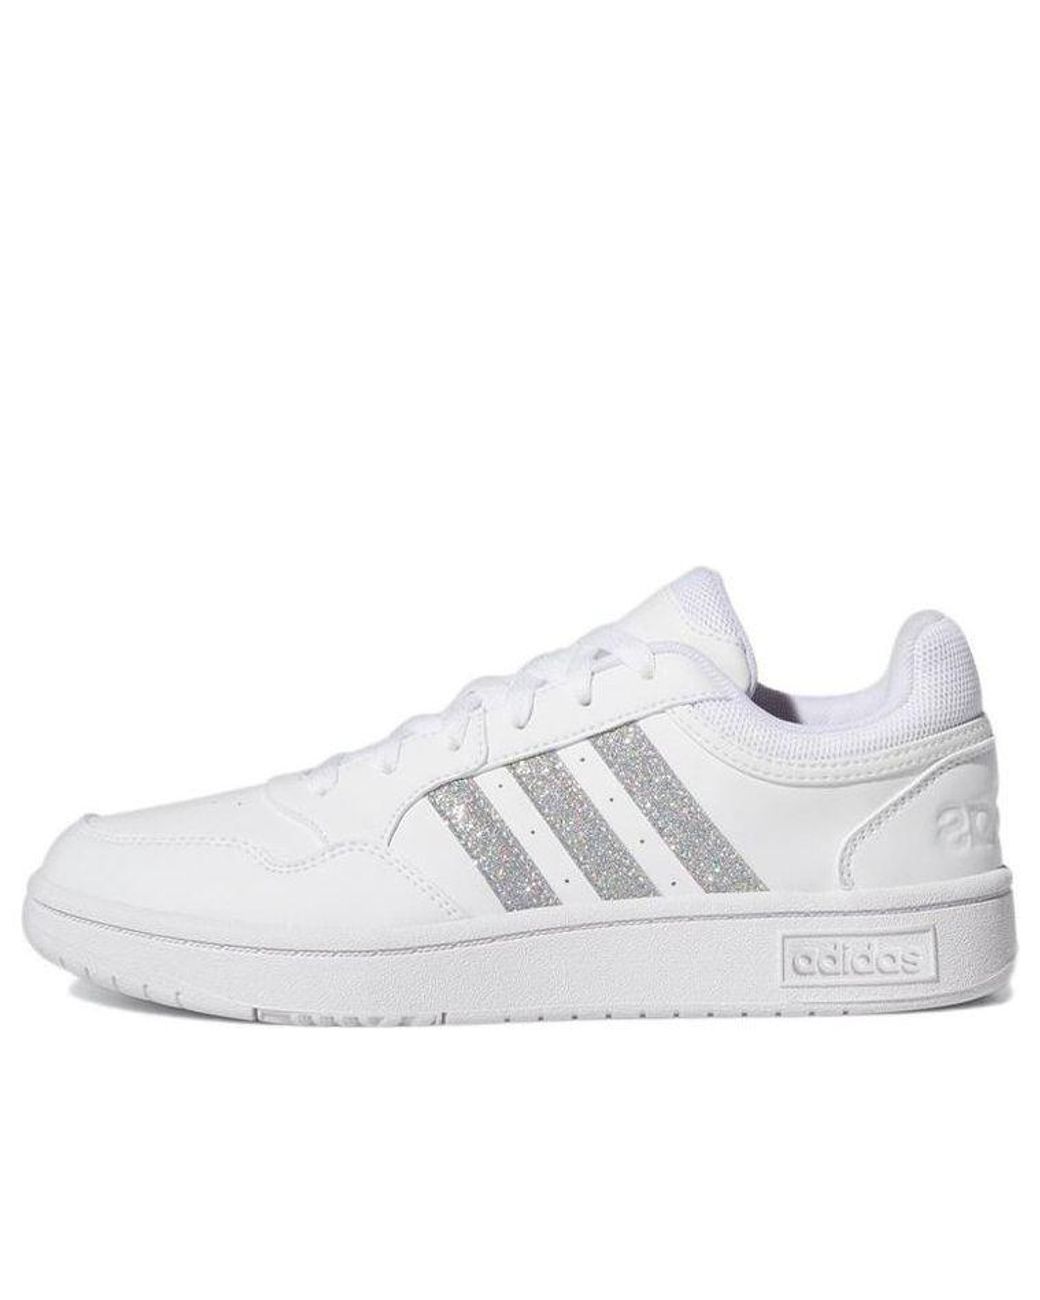 adidas Neo Hoops 3.0 Low Cut Tennis Shoes 'white Silver Metallic' | Lyst